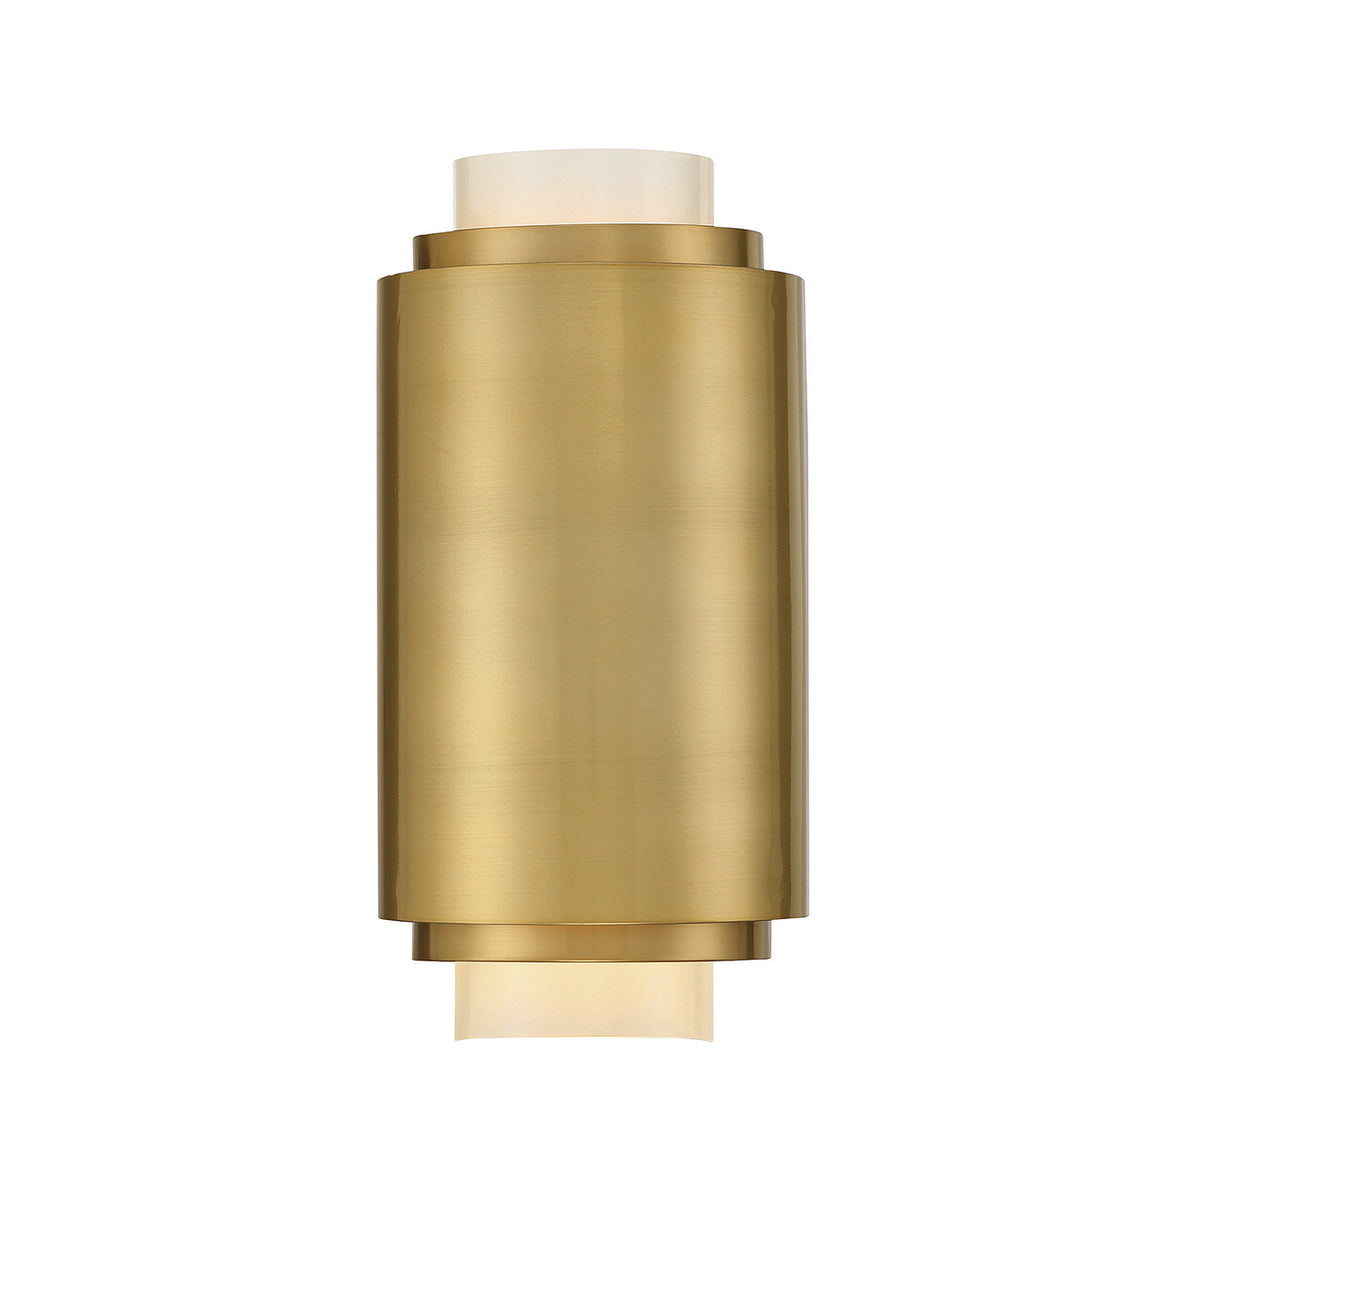 Beacon 2-Light Sconce in Burnished Brass